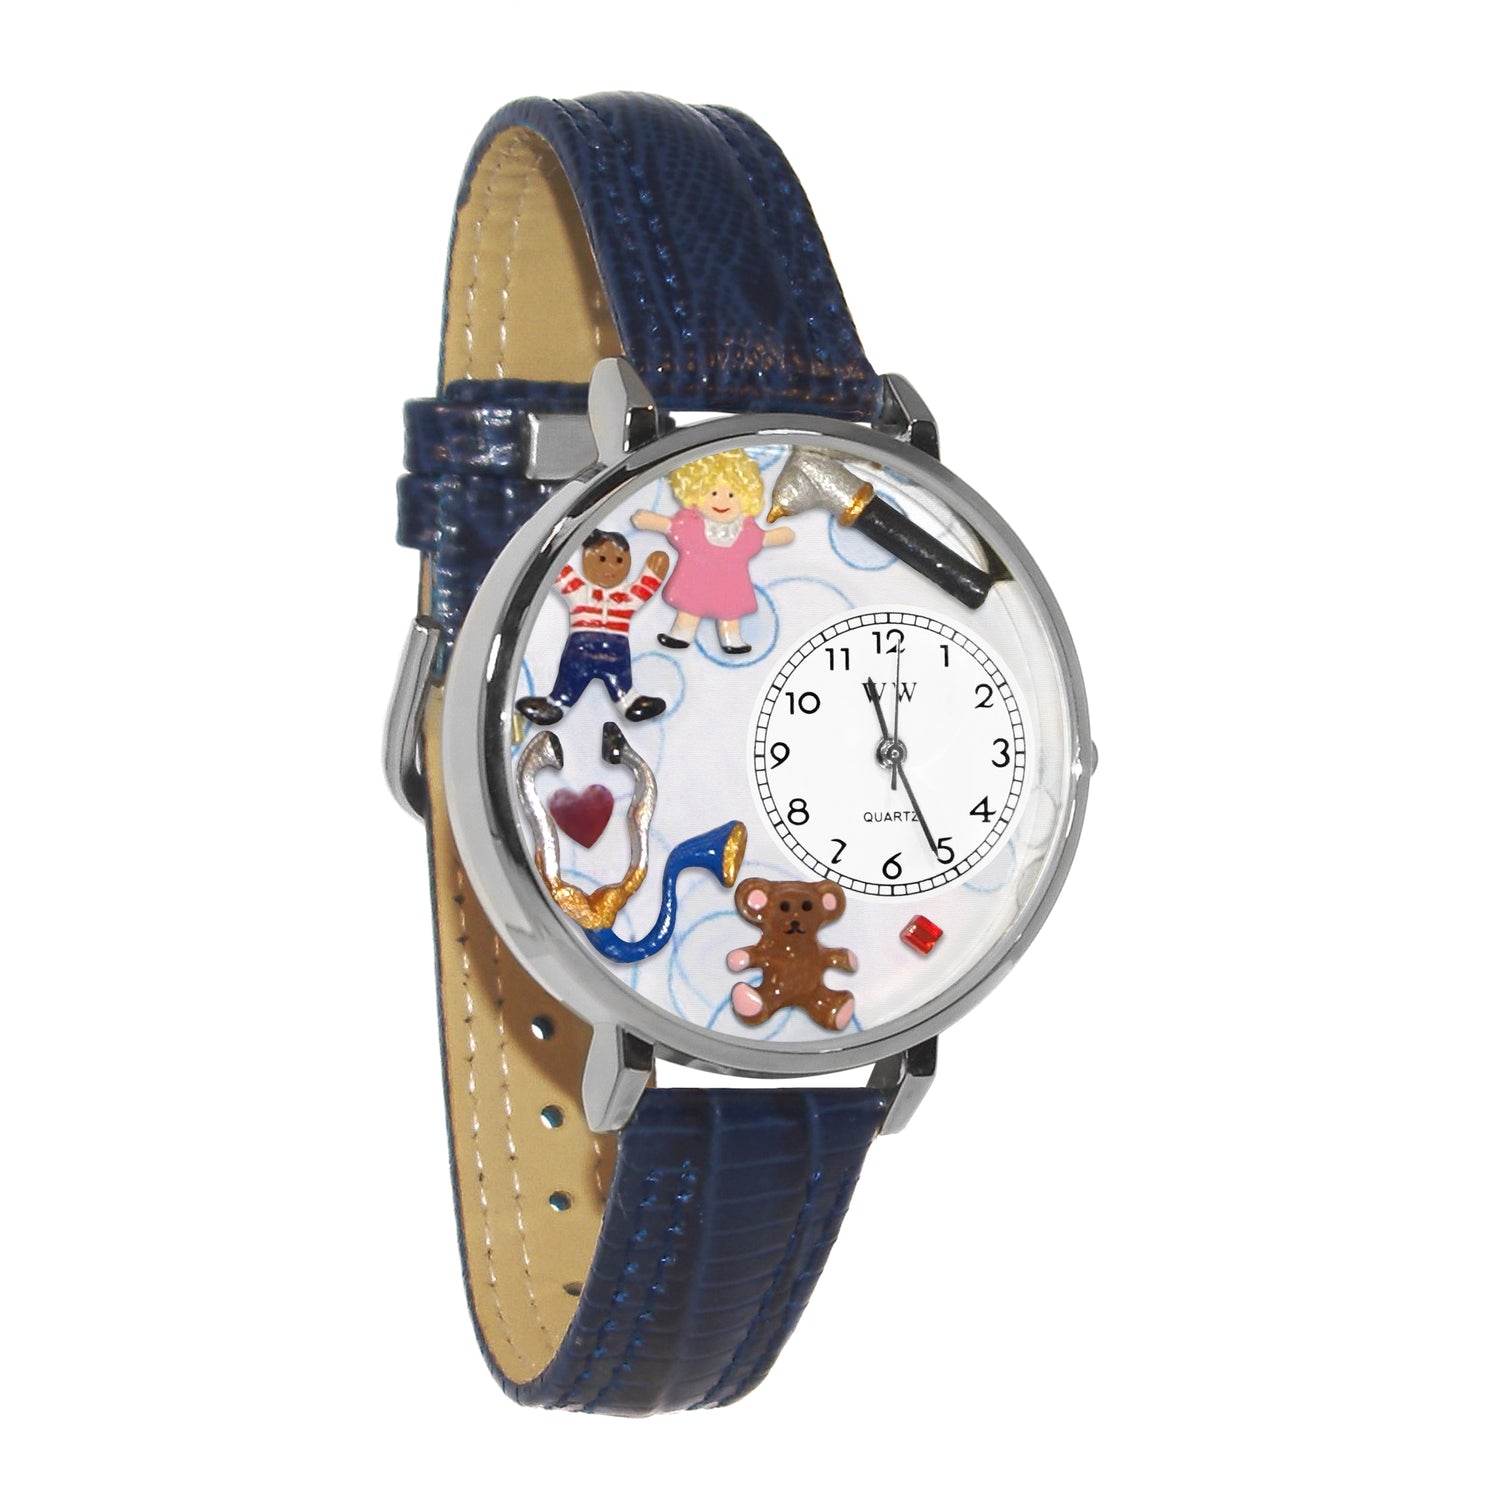 Whimsical Gifts | Pediatrician 3D Watch Large Style | Handmade in USA | Professions Themed | Medical Professions | Novelty Unique Fun Miniatures Gift | Silver Finish Navy Blue Leather Watch Band